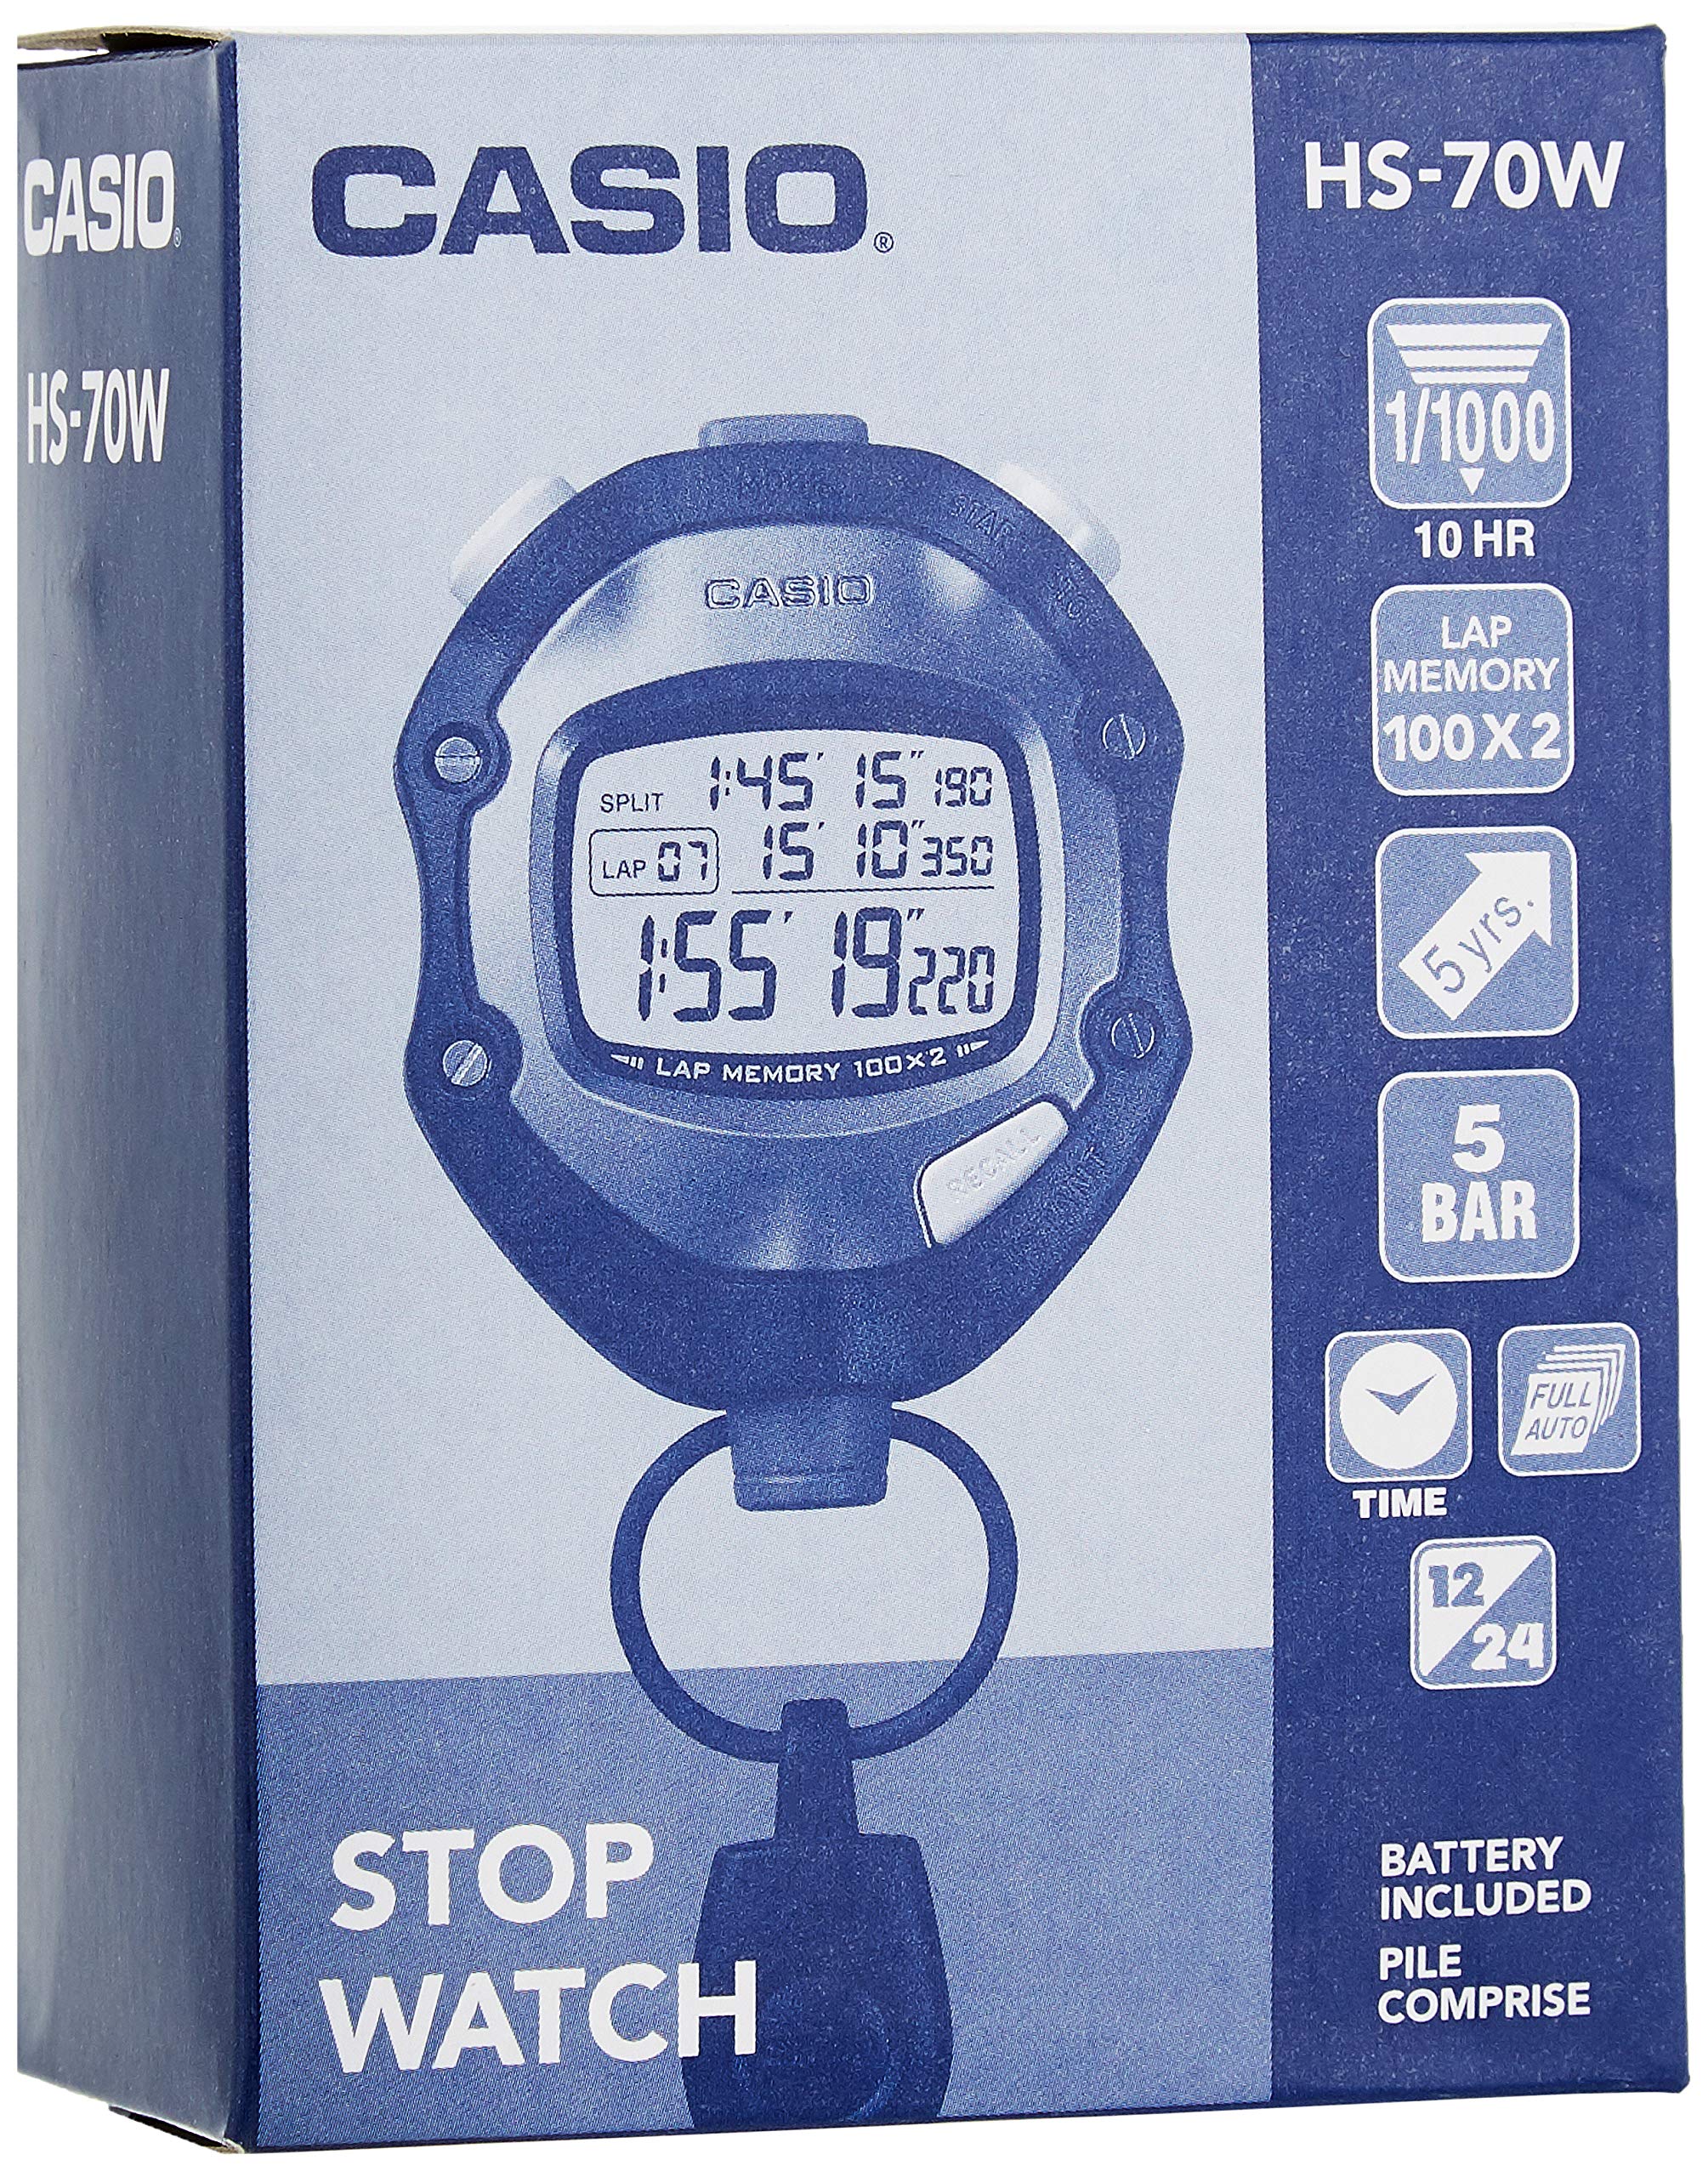 Casio Hs-70w Black Multi-function Digital Stopwatch Pile Comprise Battery Included